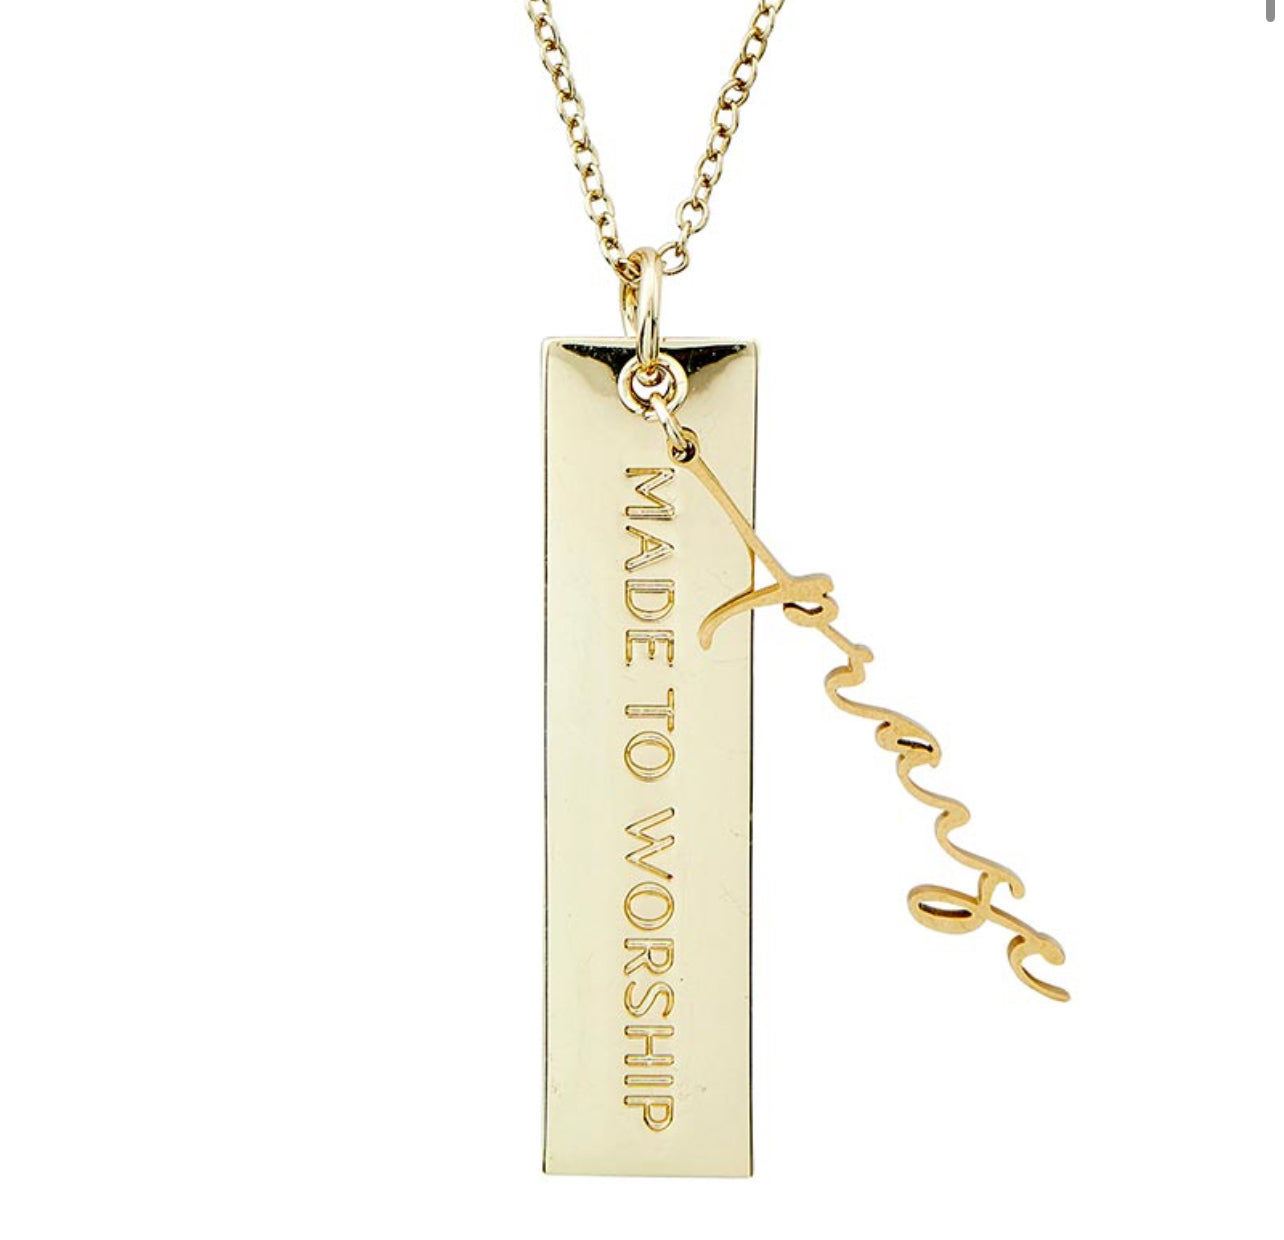 Name Plate Necklace - Praise